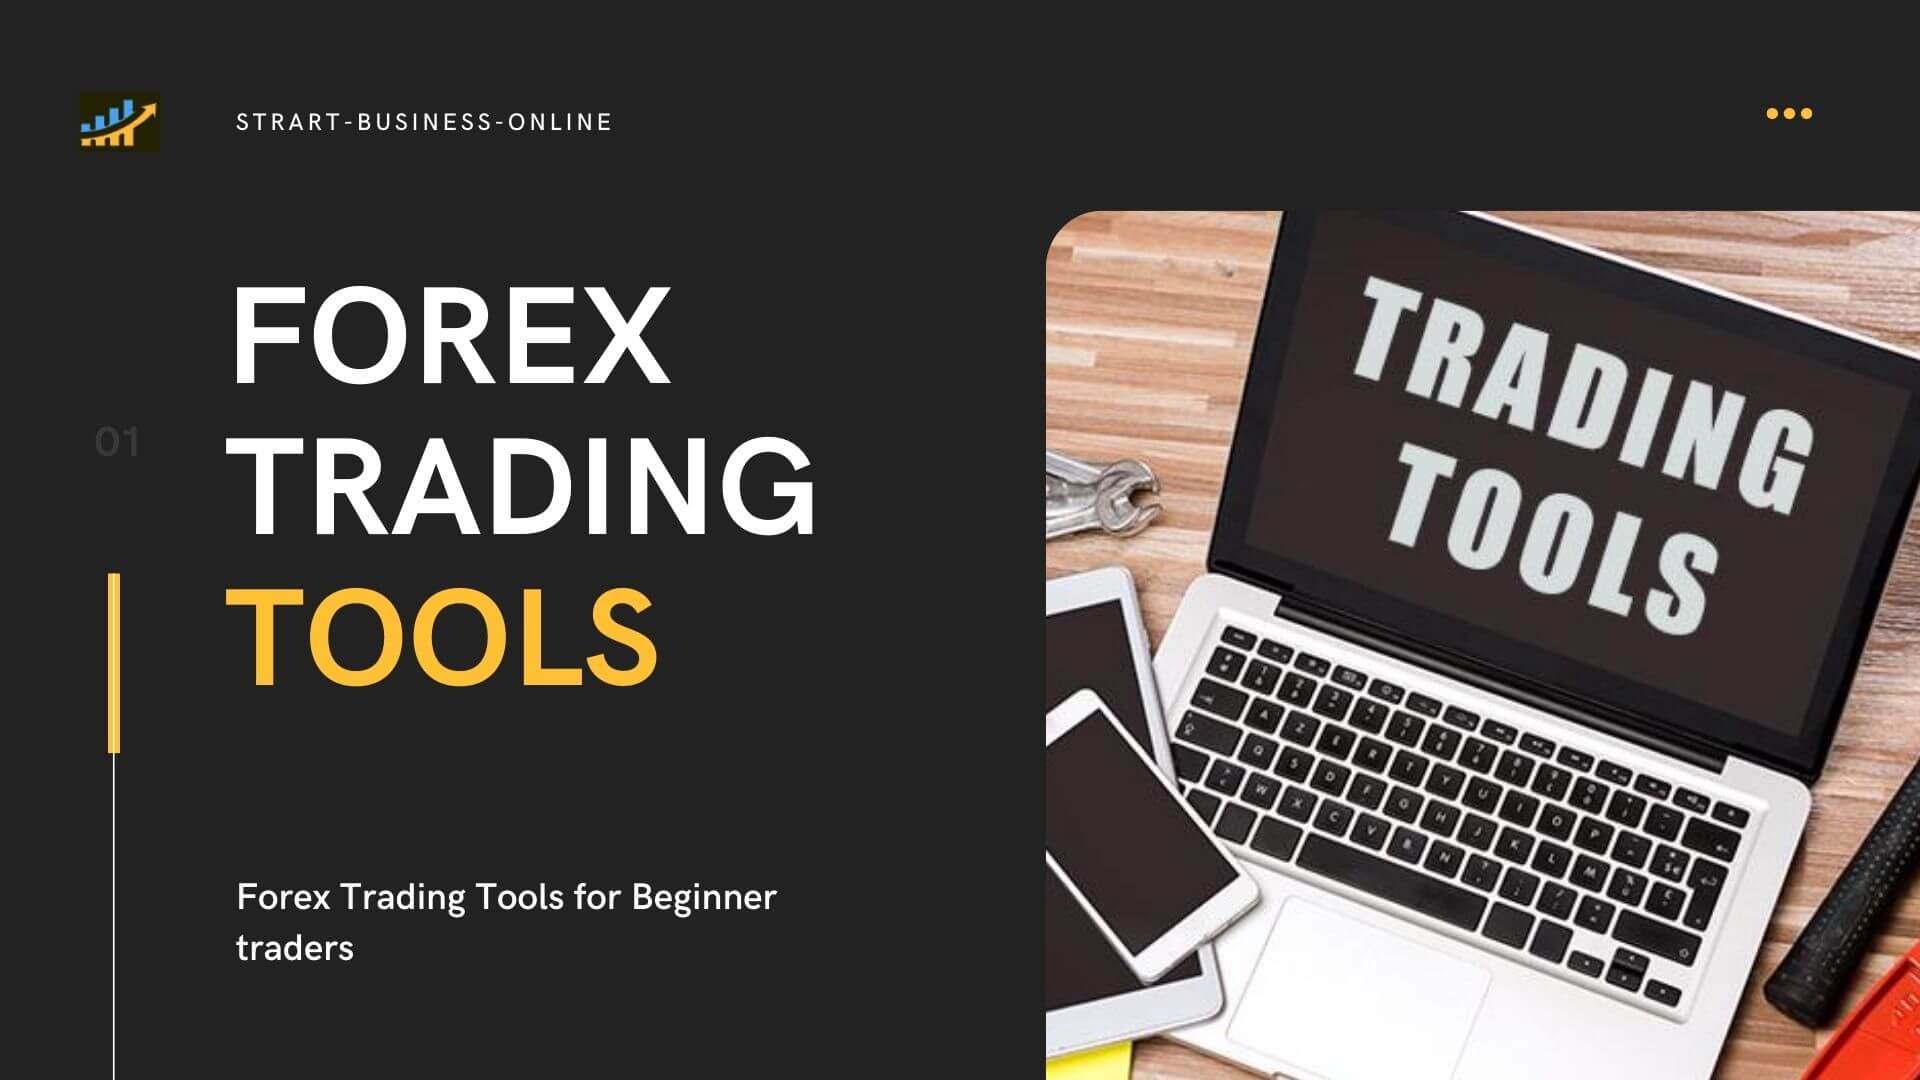 Forex Trading Tools for Beginner traders